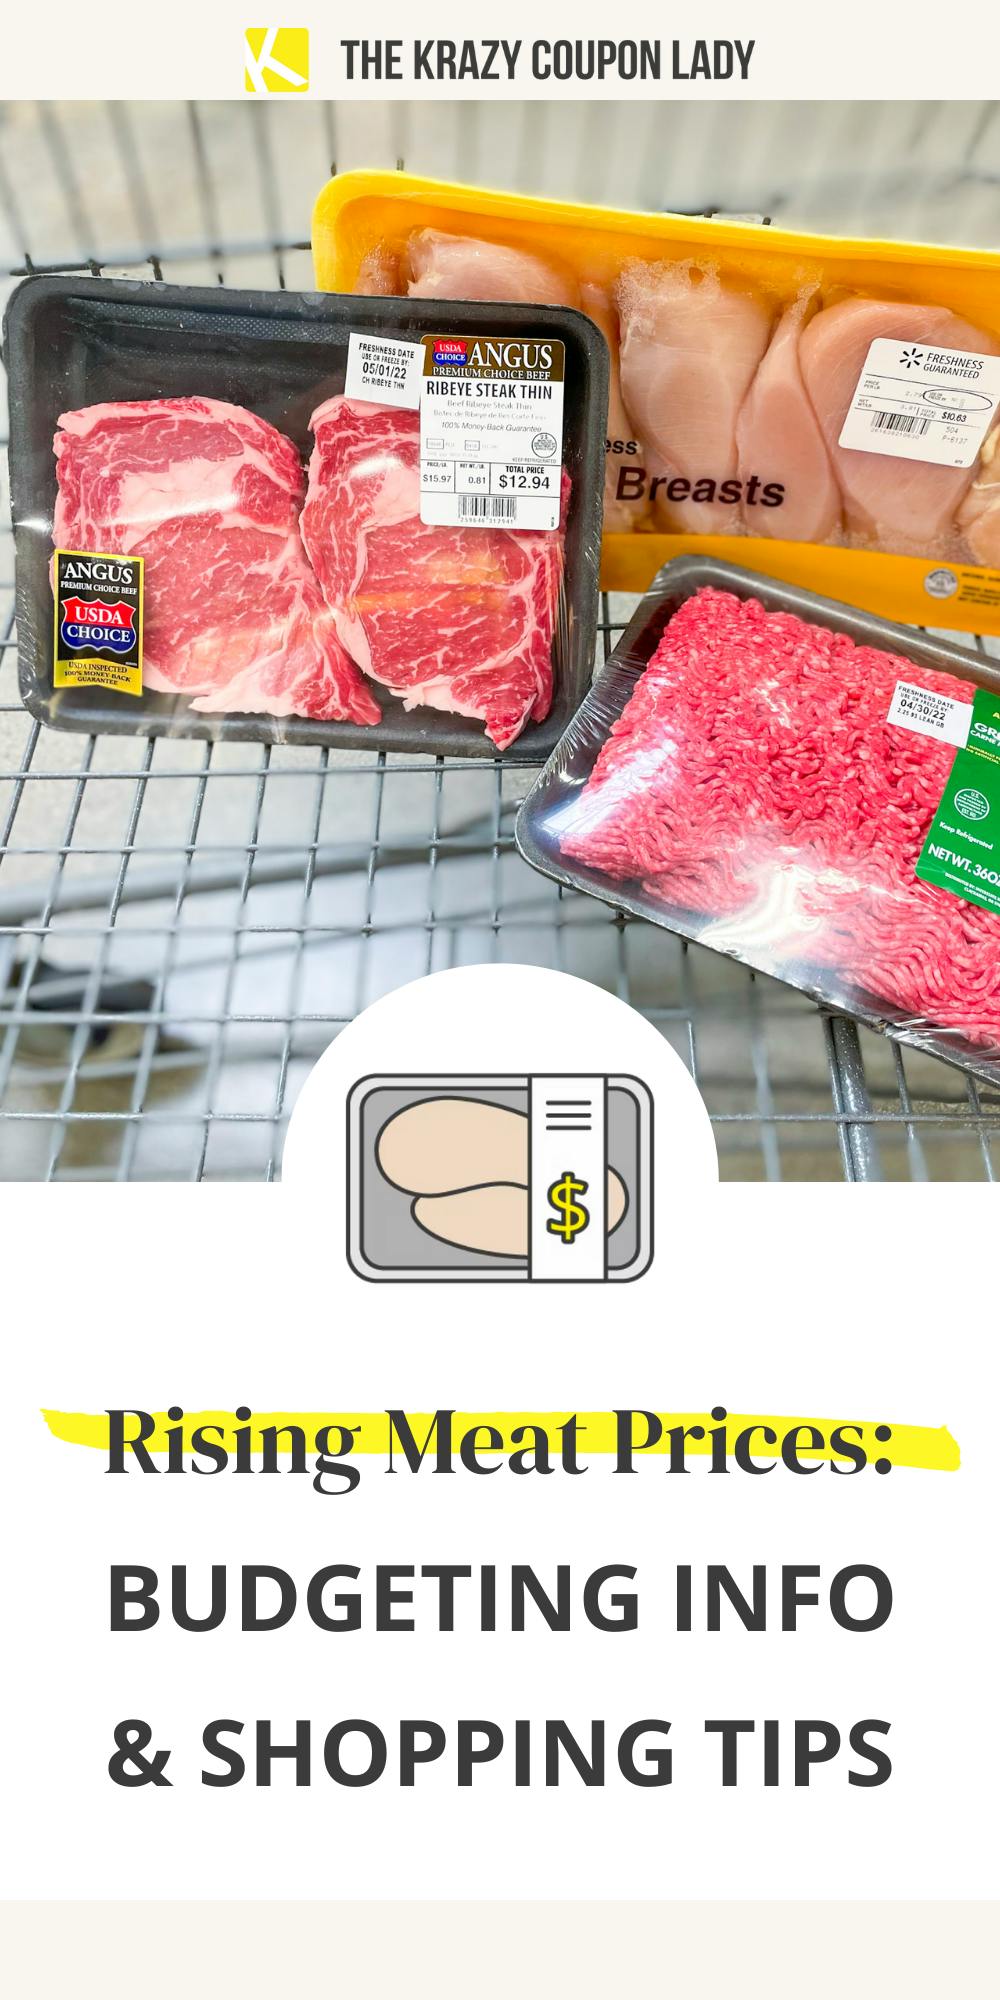 High Meat Prices: These Cuts Are Cheaper at Certain Stores